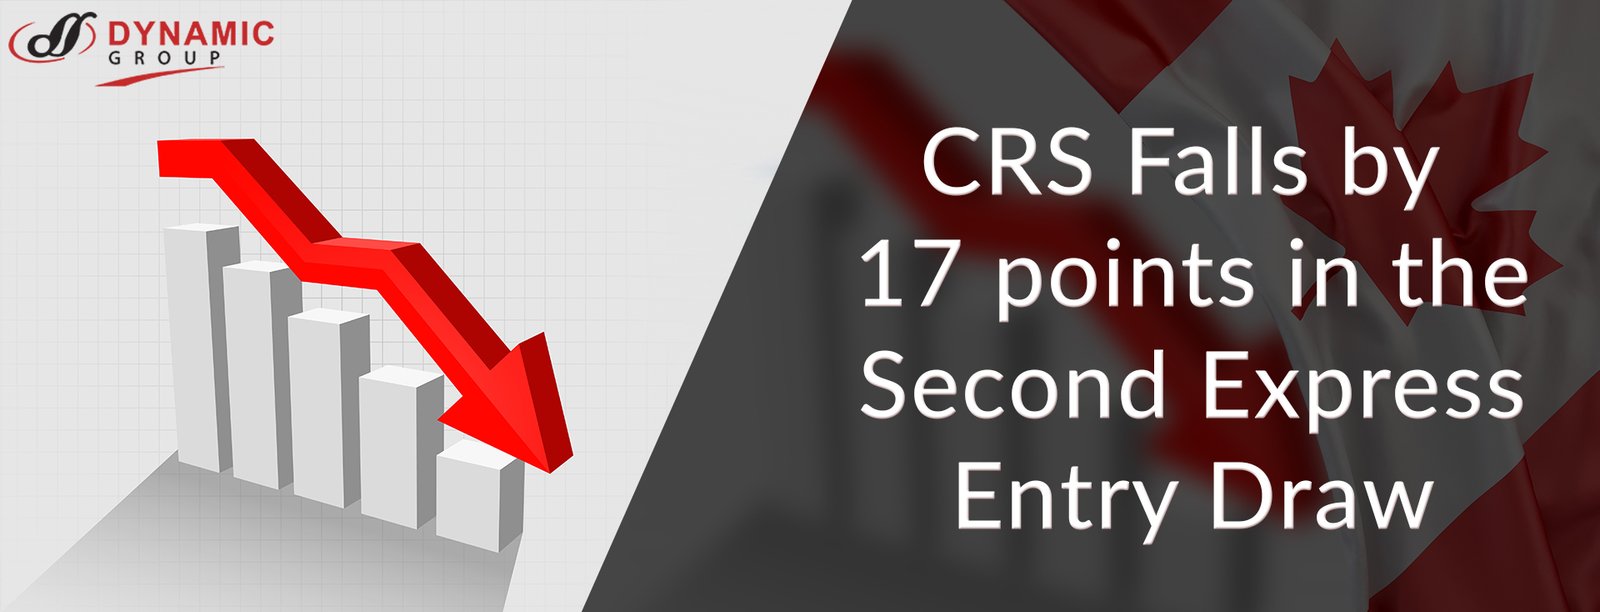 IRCC Invites 730 Candidates with a minimum CRS score of 541 in the Latest  Express Entry Draw, #CanadaImmigration #ExpressEntry… | Instagram